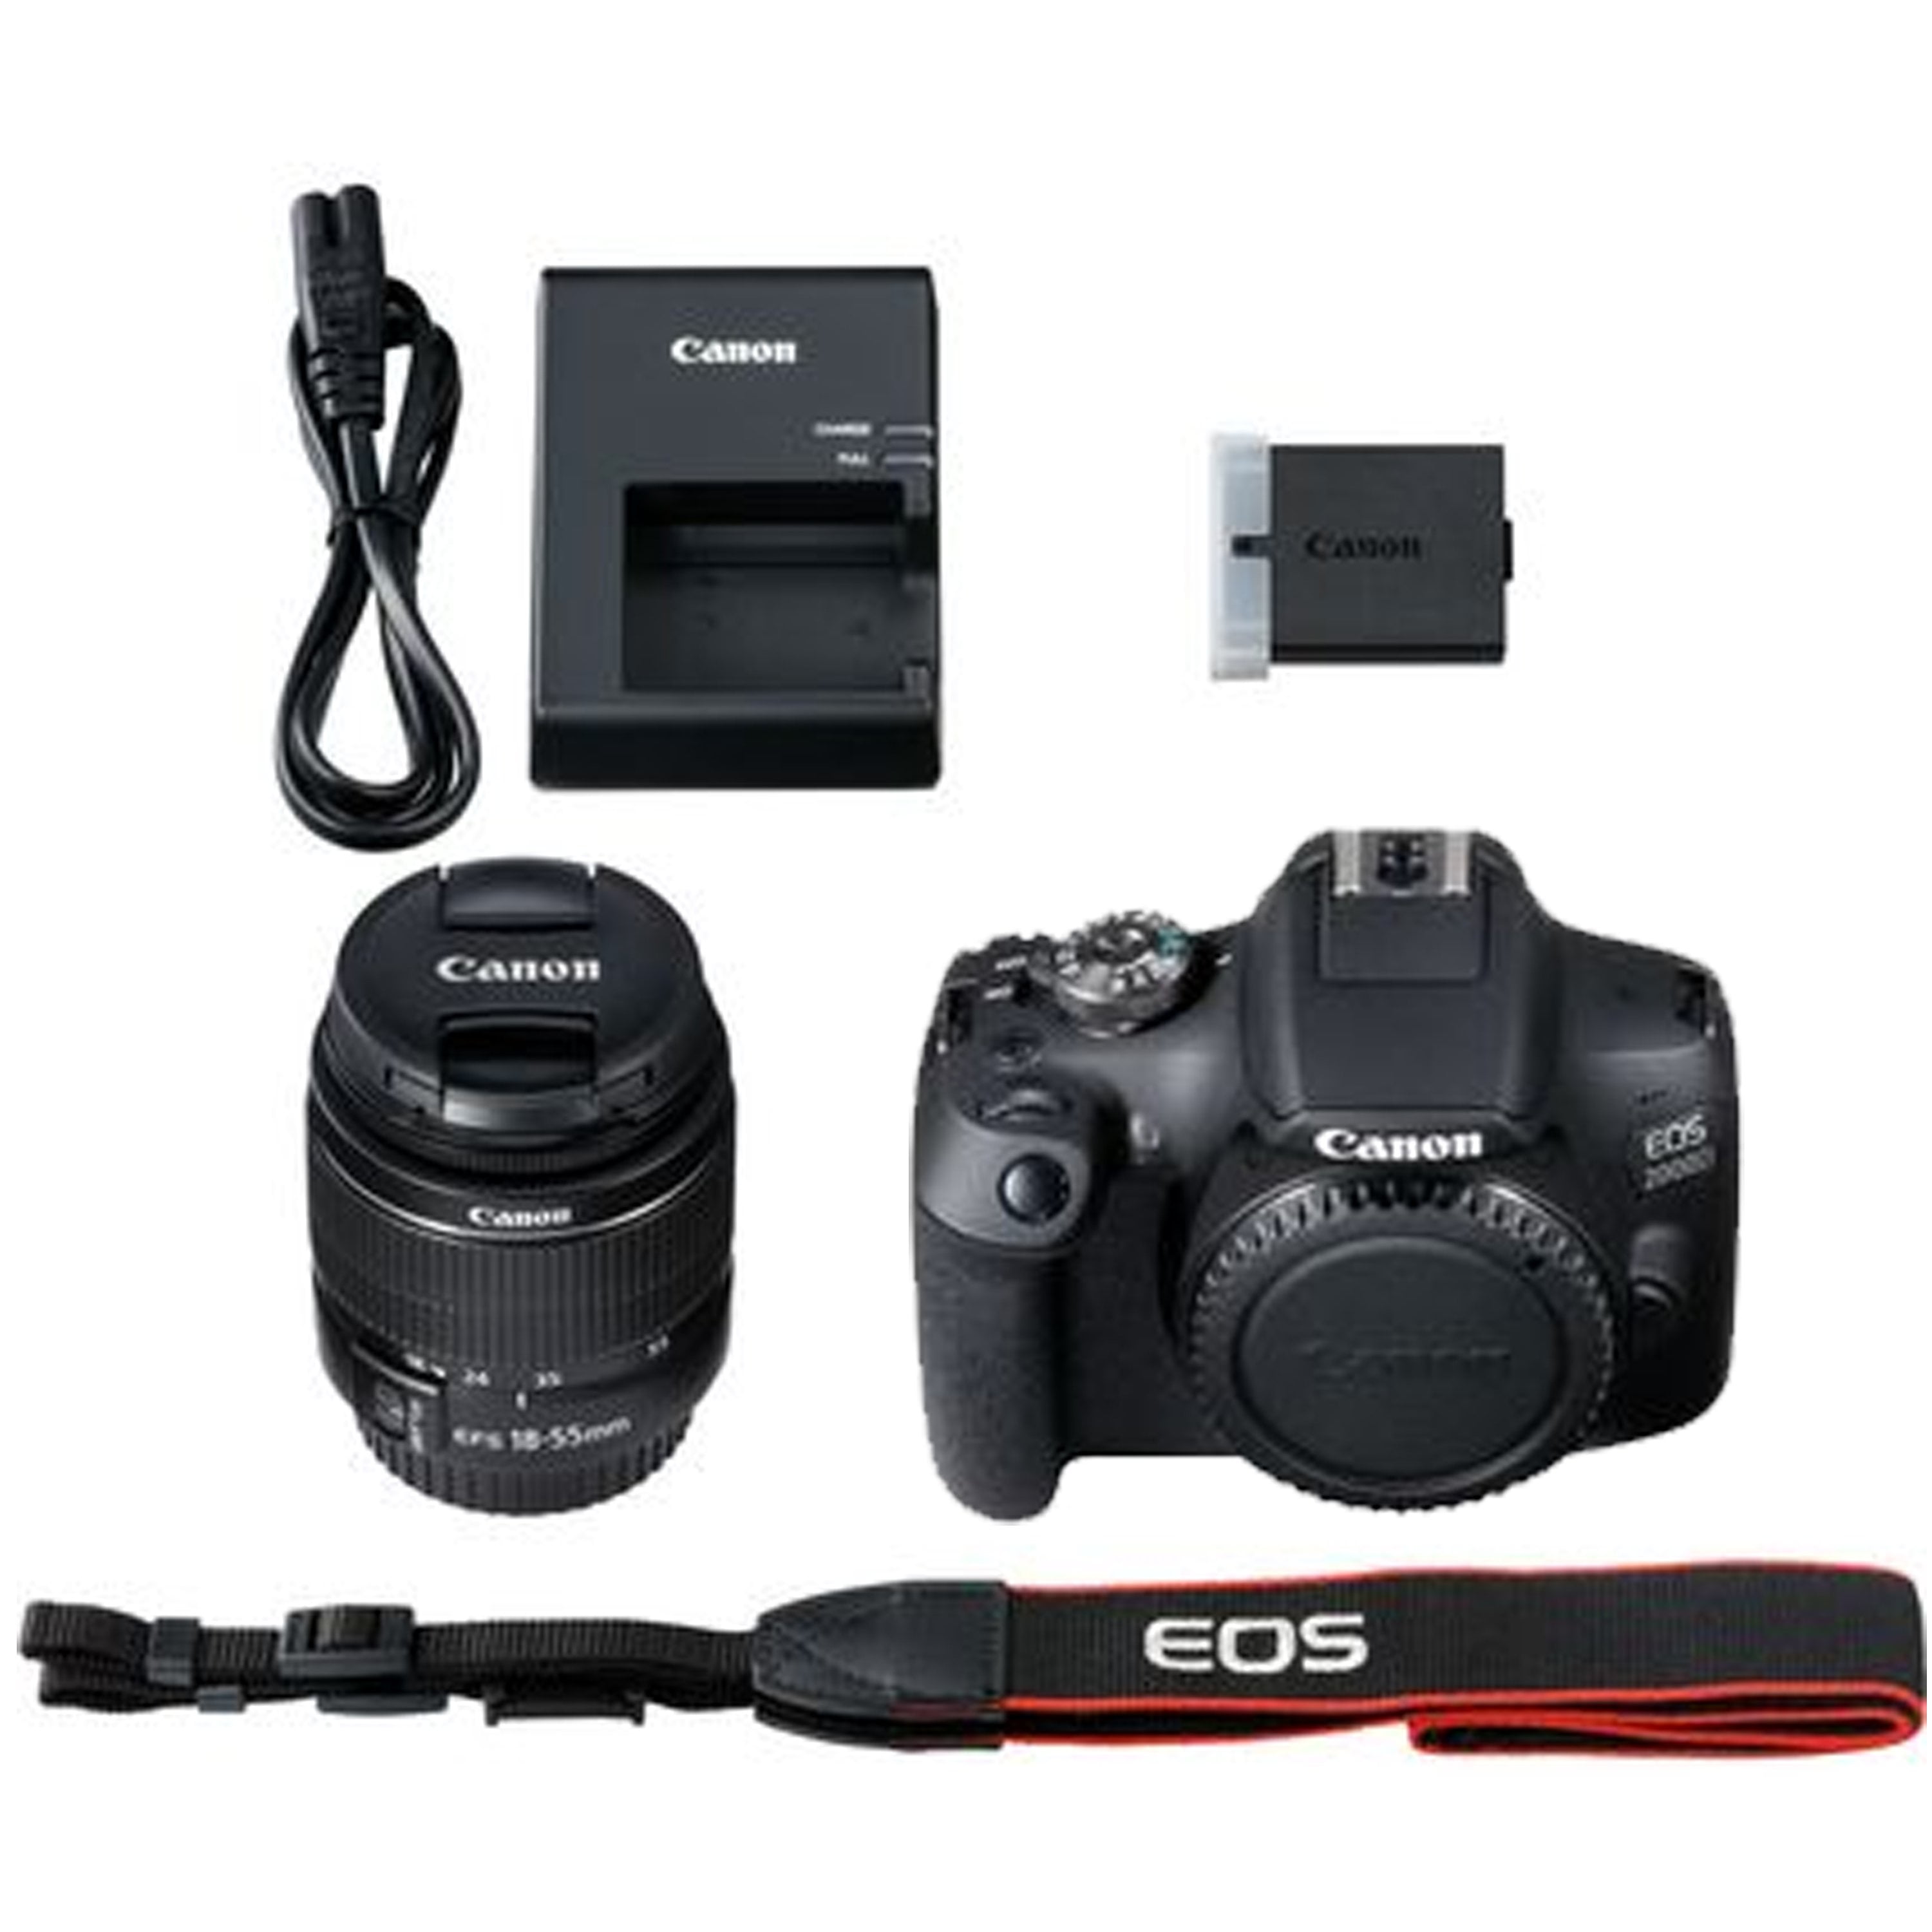 + Rebel Flash, Tripod, Bundle and 20pc EOS More Zoom DSLR + f/3.5-5.6 2000D T7 with Canon Lens 128GB Card, Camera 18-55mm